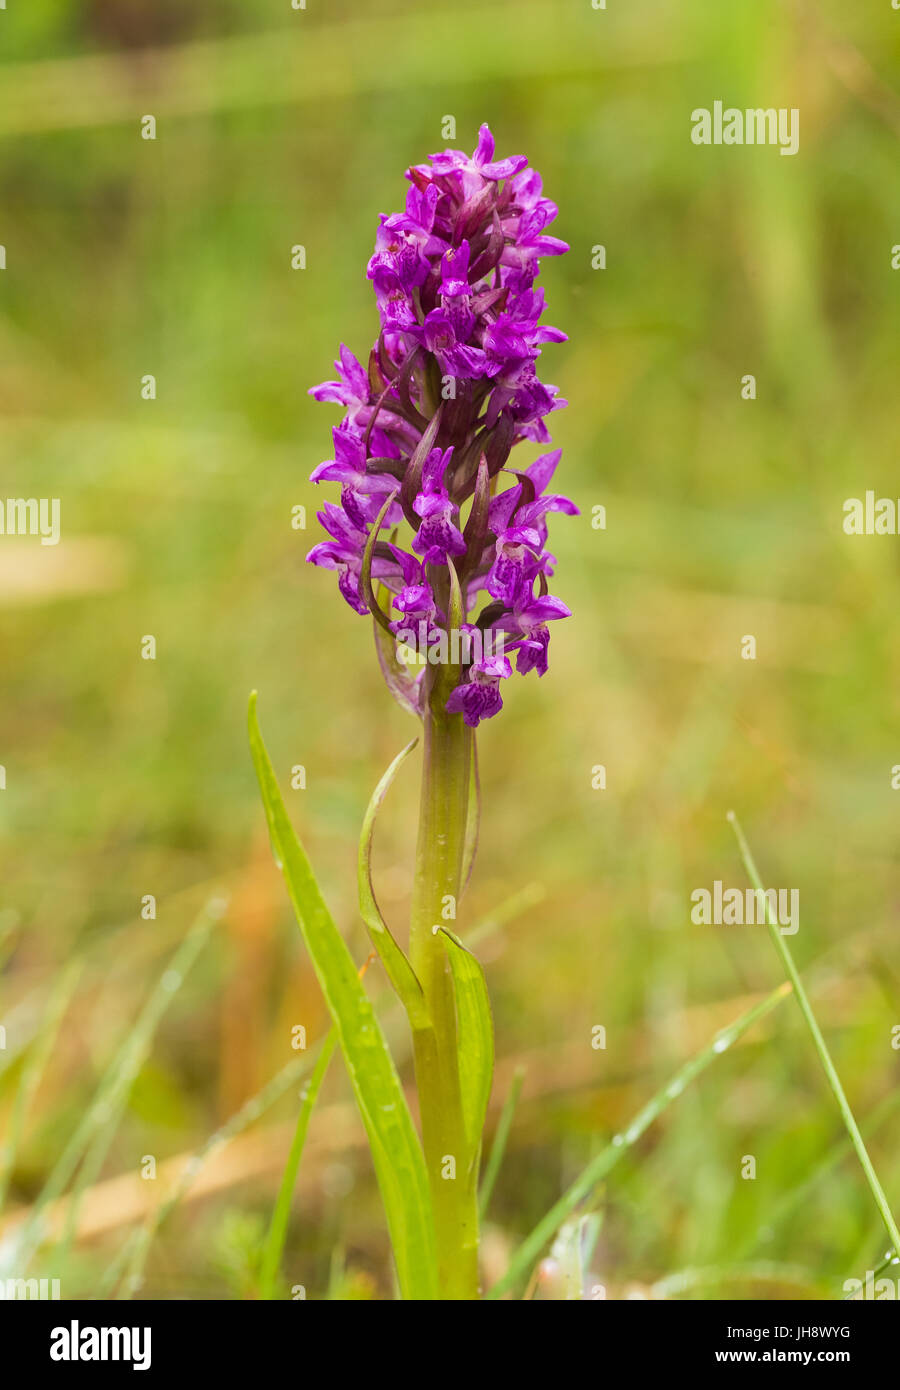 A beautiful rare pink wild orchid blossoming in the summer marsh. Closup macro photo, shallow depth of field. Stock Photo